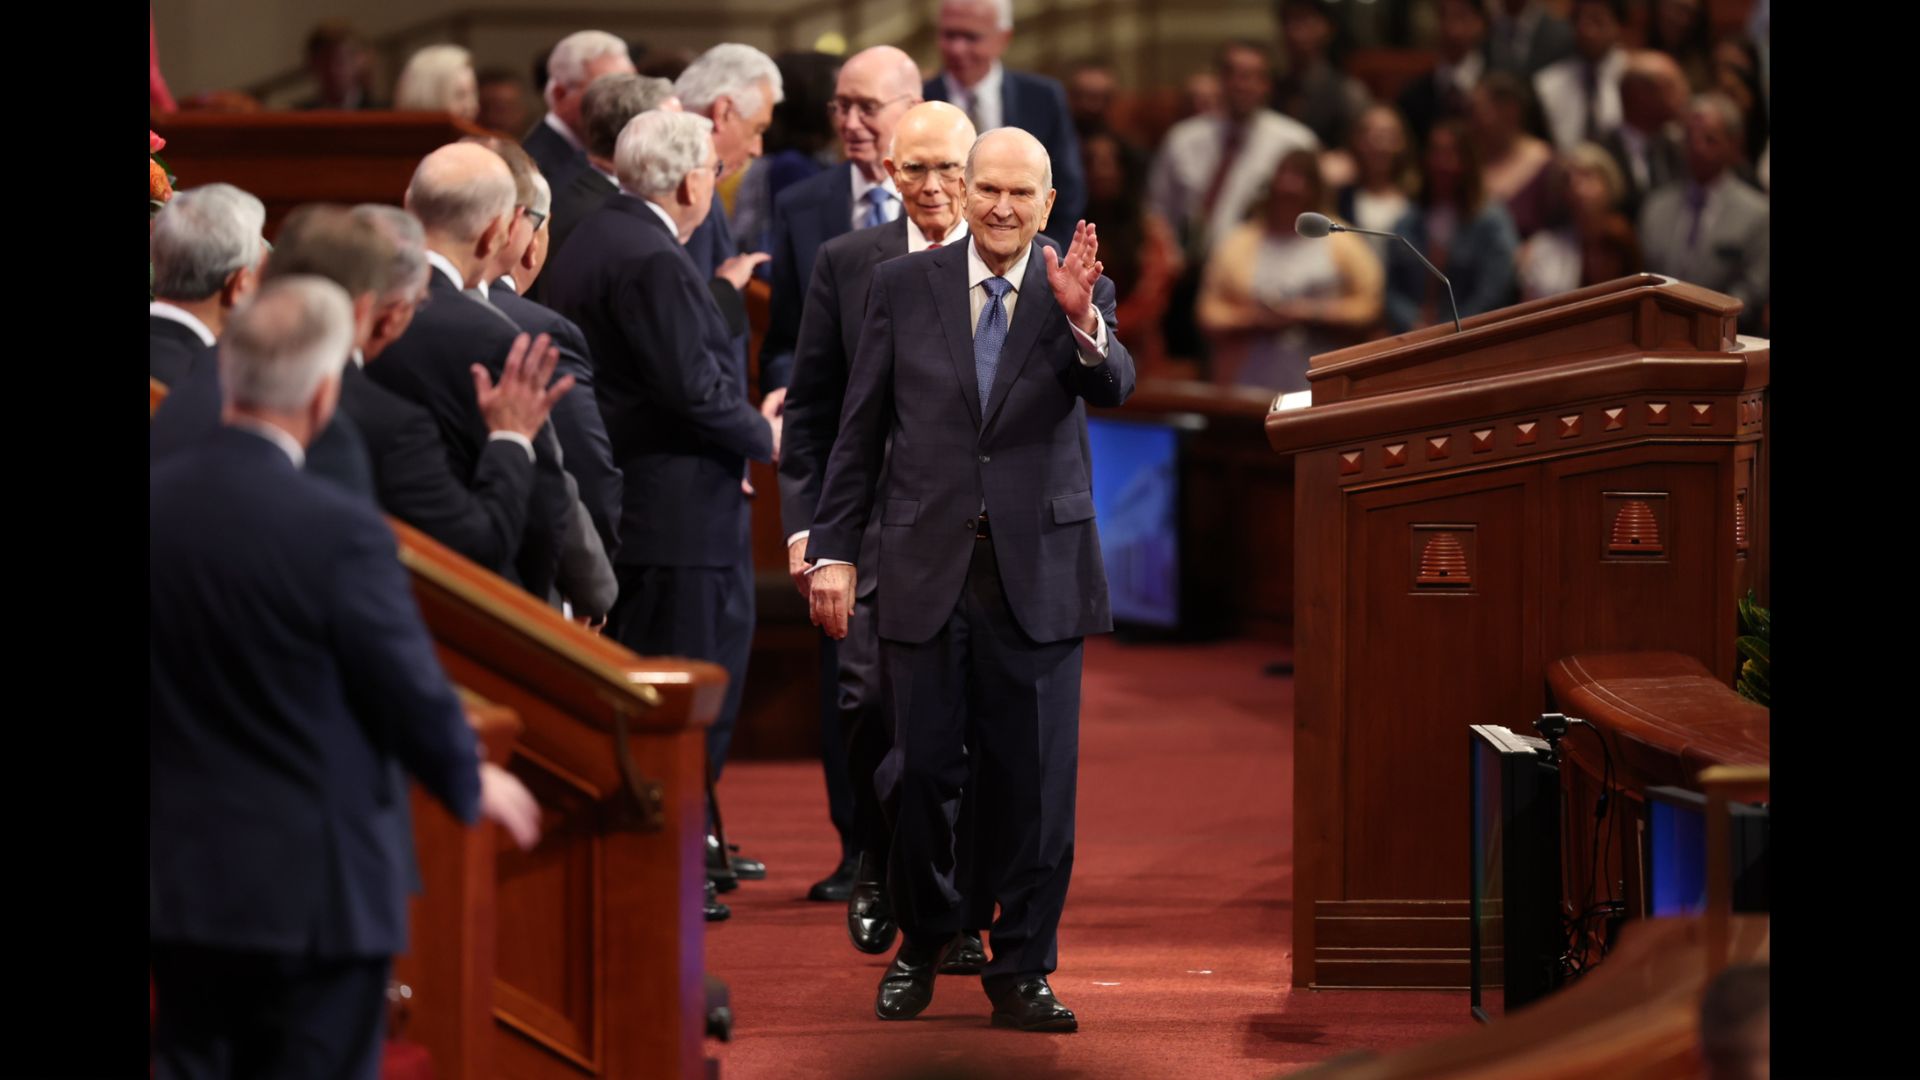 LDS Church president announces 18 new temples as general conference